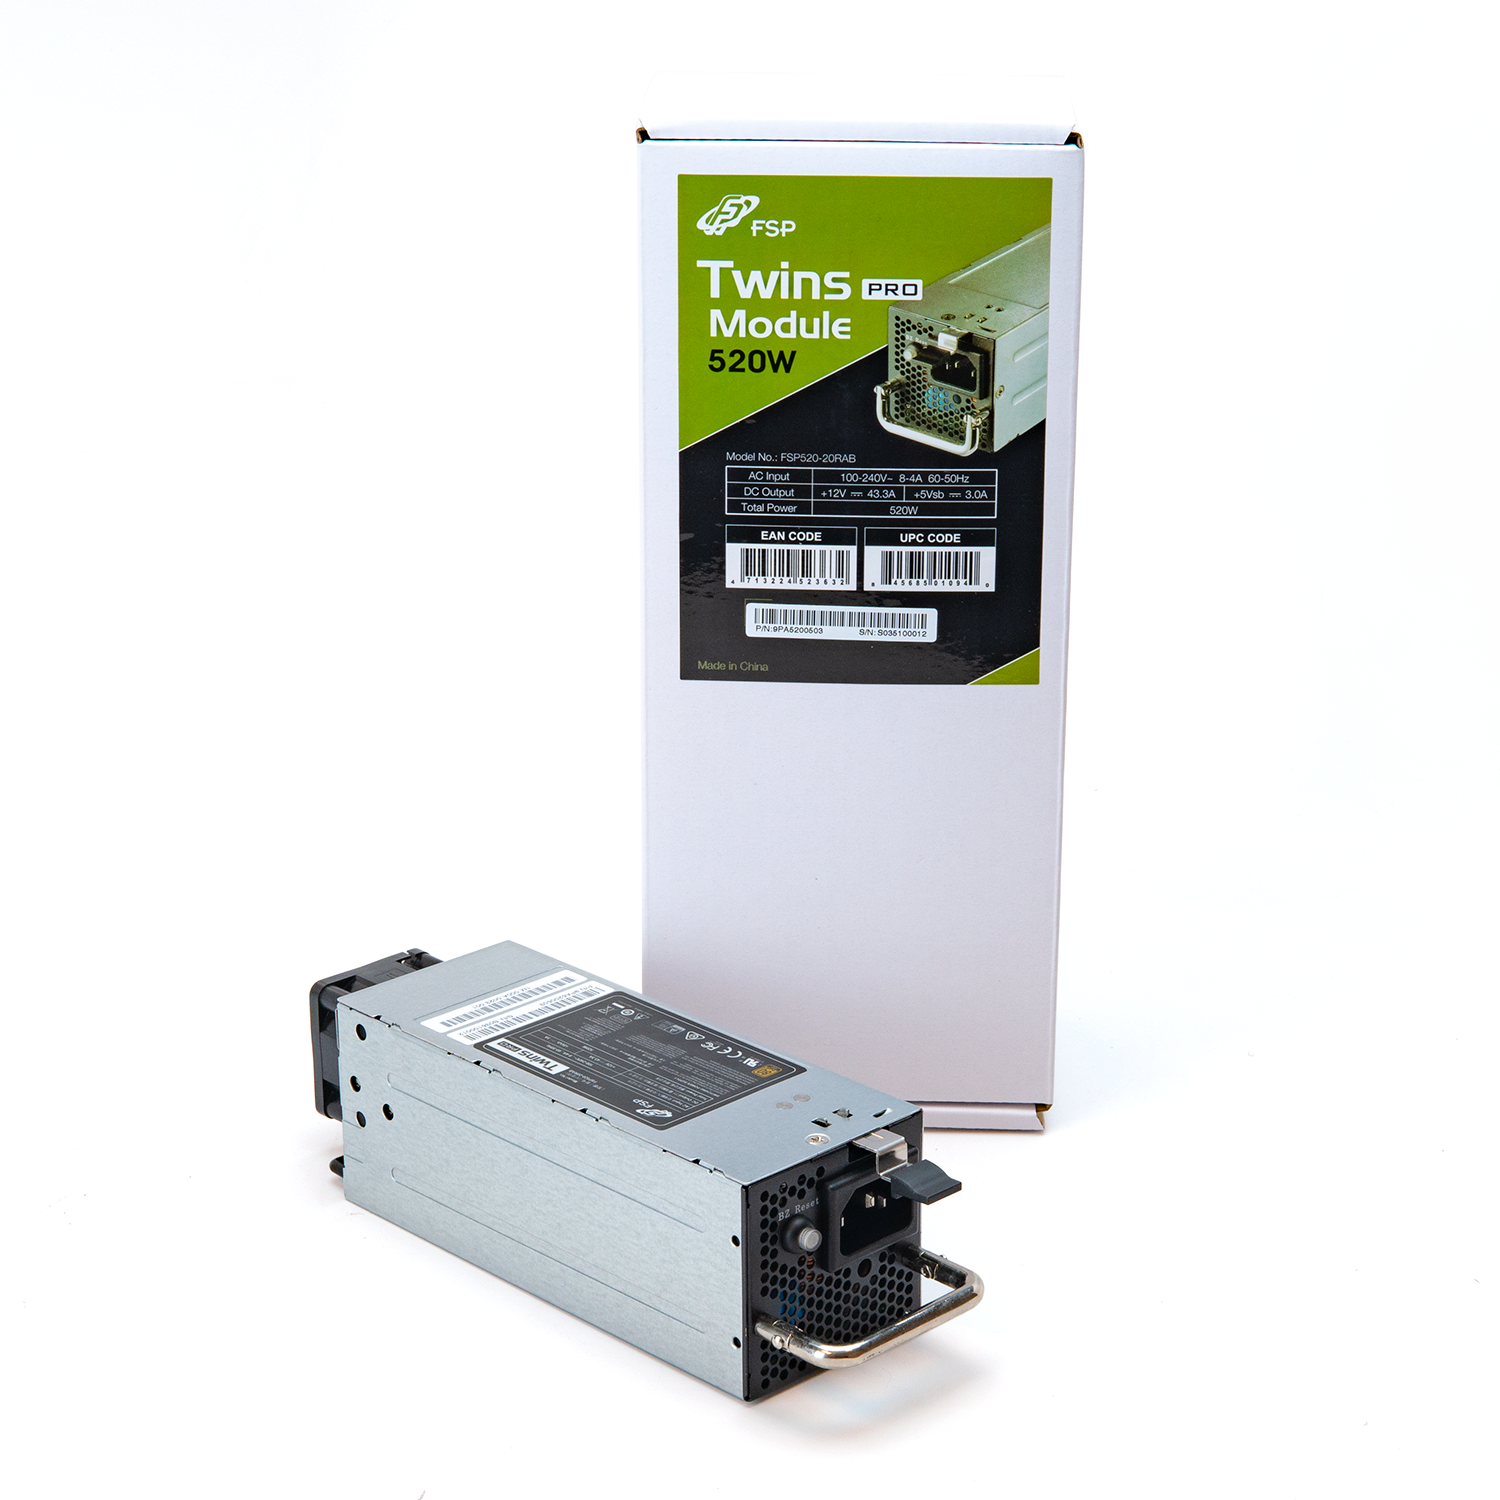 Twins Pro 520W Replacement Module for the Twins Pro 500W PSU (FSP520-20RAB)